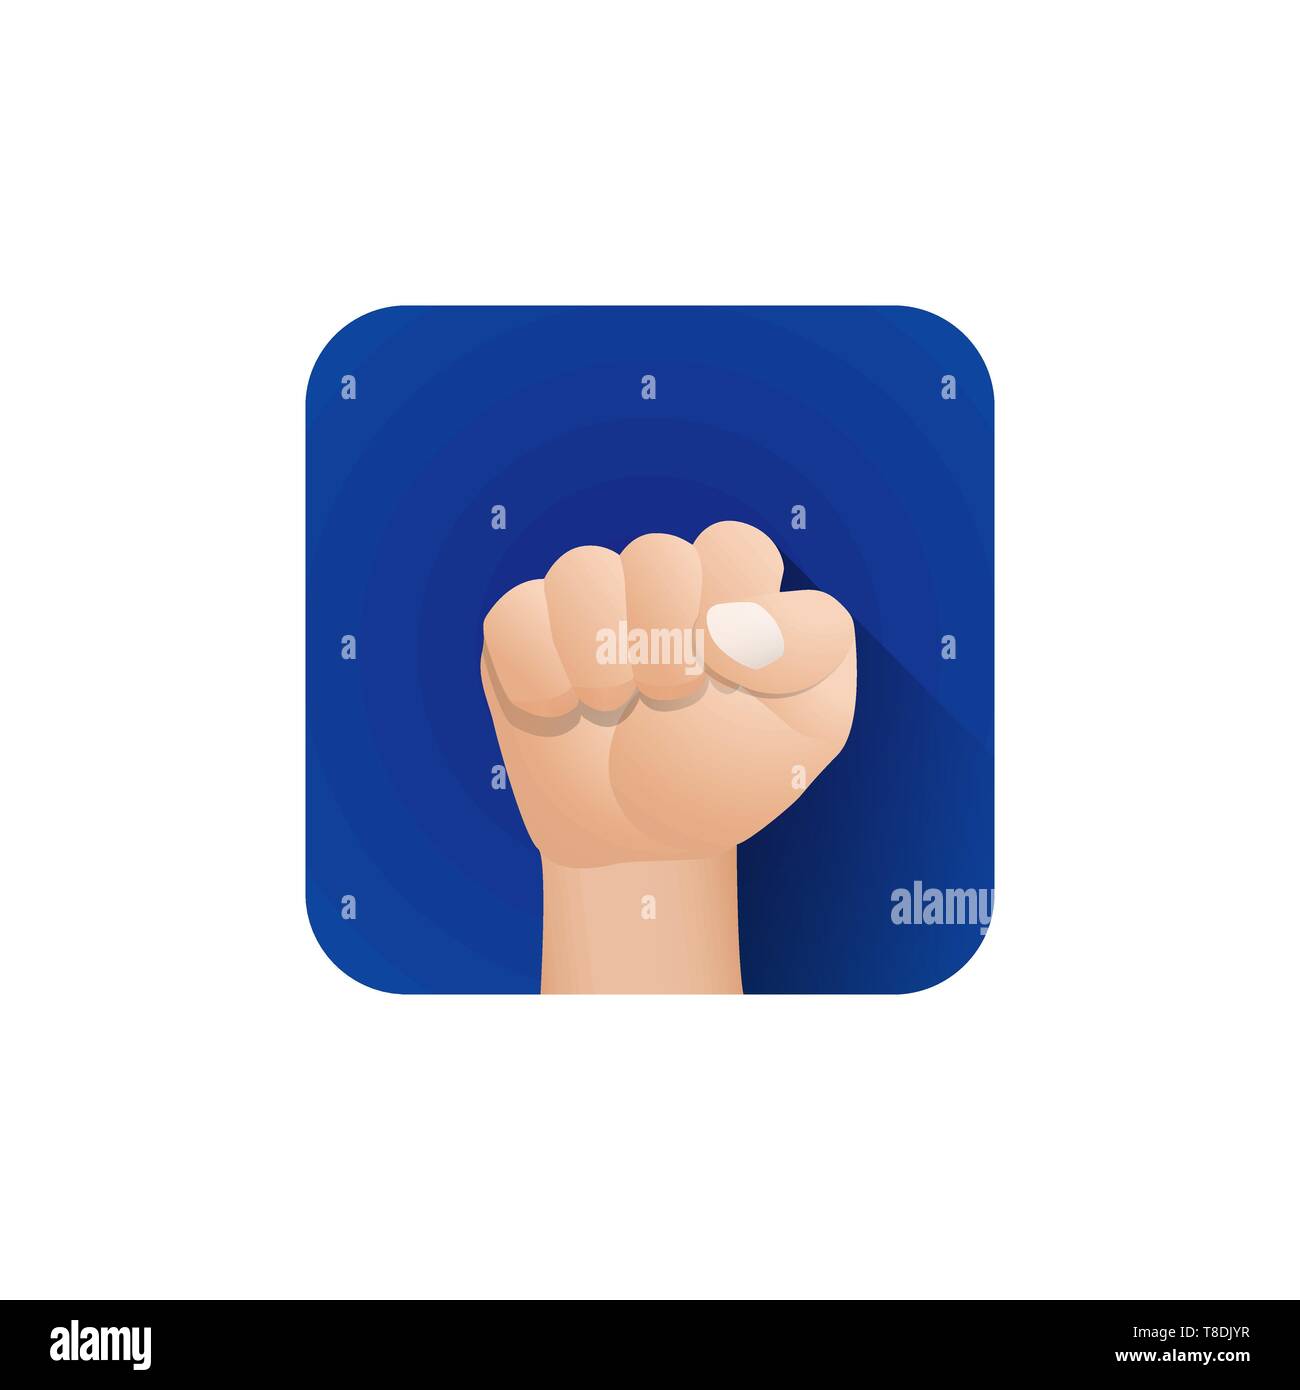 vector symbolic raised clenched power fist gesture male hand protest concept sign illustration light icon poster design isolated on blue background Stock Vector